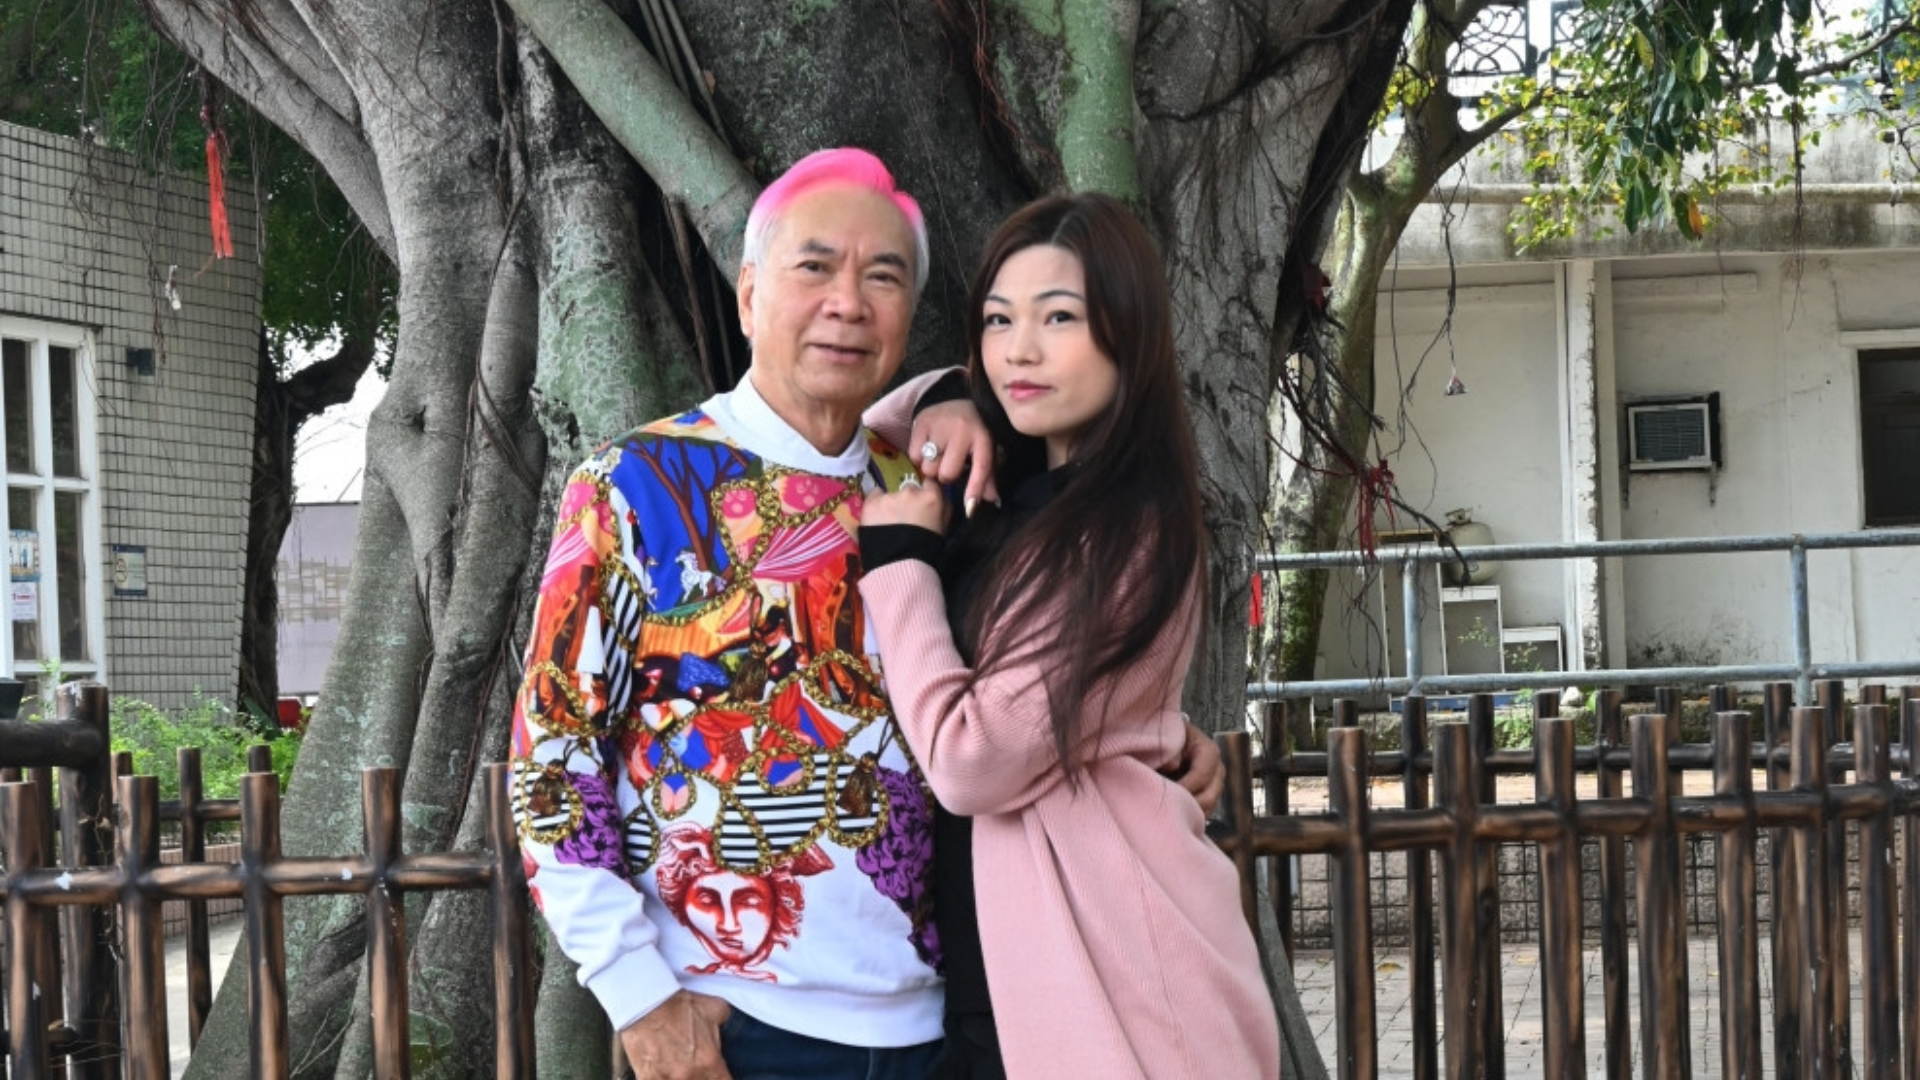 Veteran star Lee Lung Kei's much younger fiancée jailed by Hong Kong police